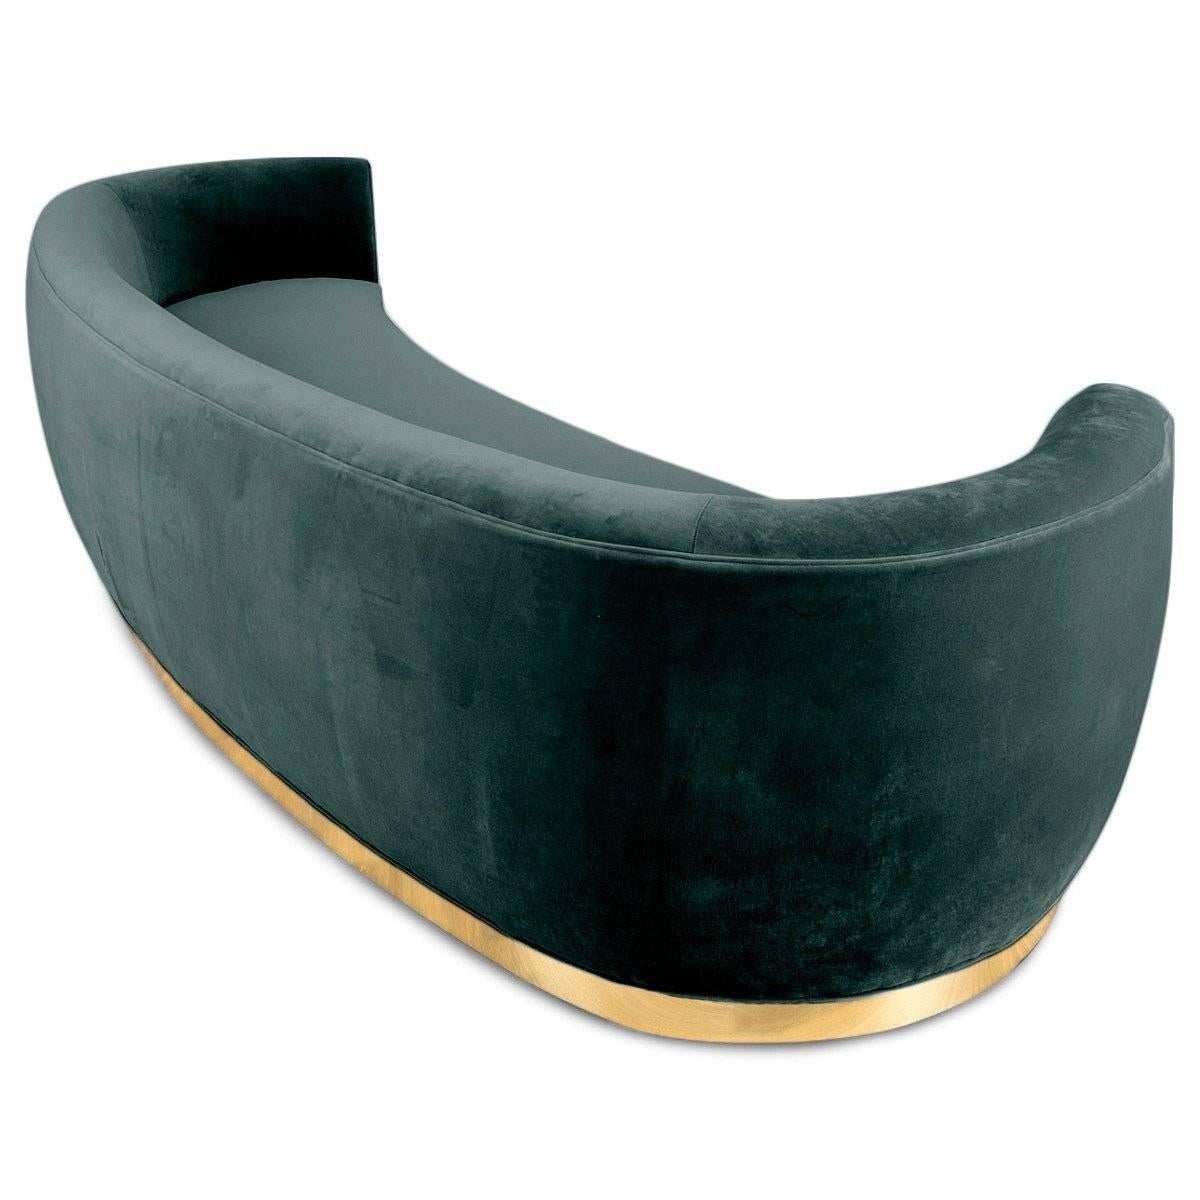 Art Deco Style Curved Sofa in Velvet Upholstery with Brass Toe-kick Base 10 foot For Sale 6